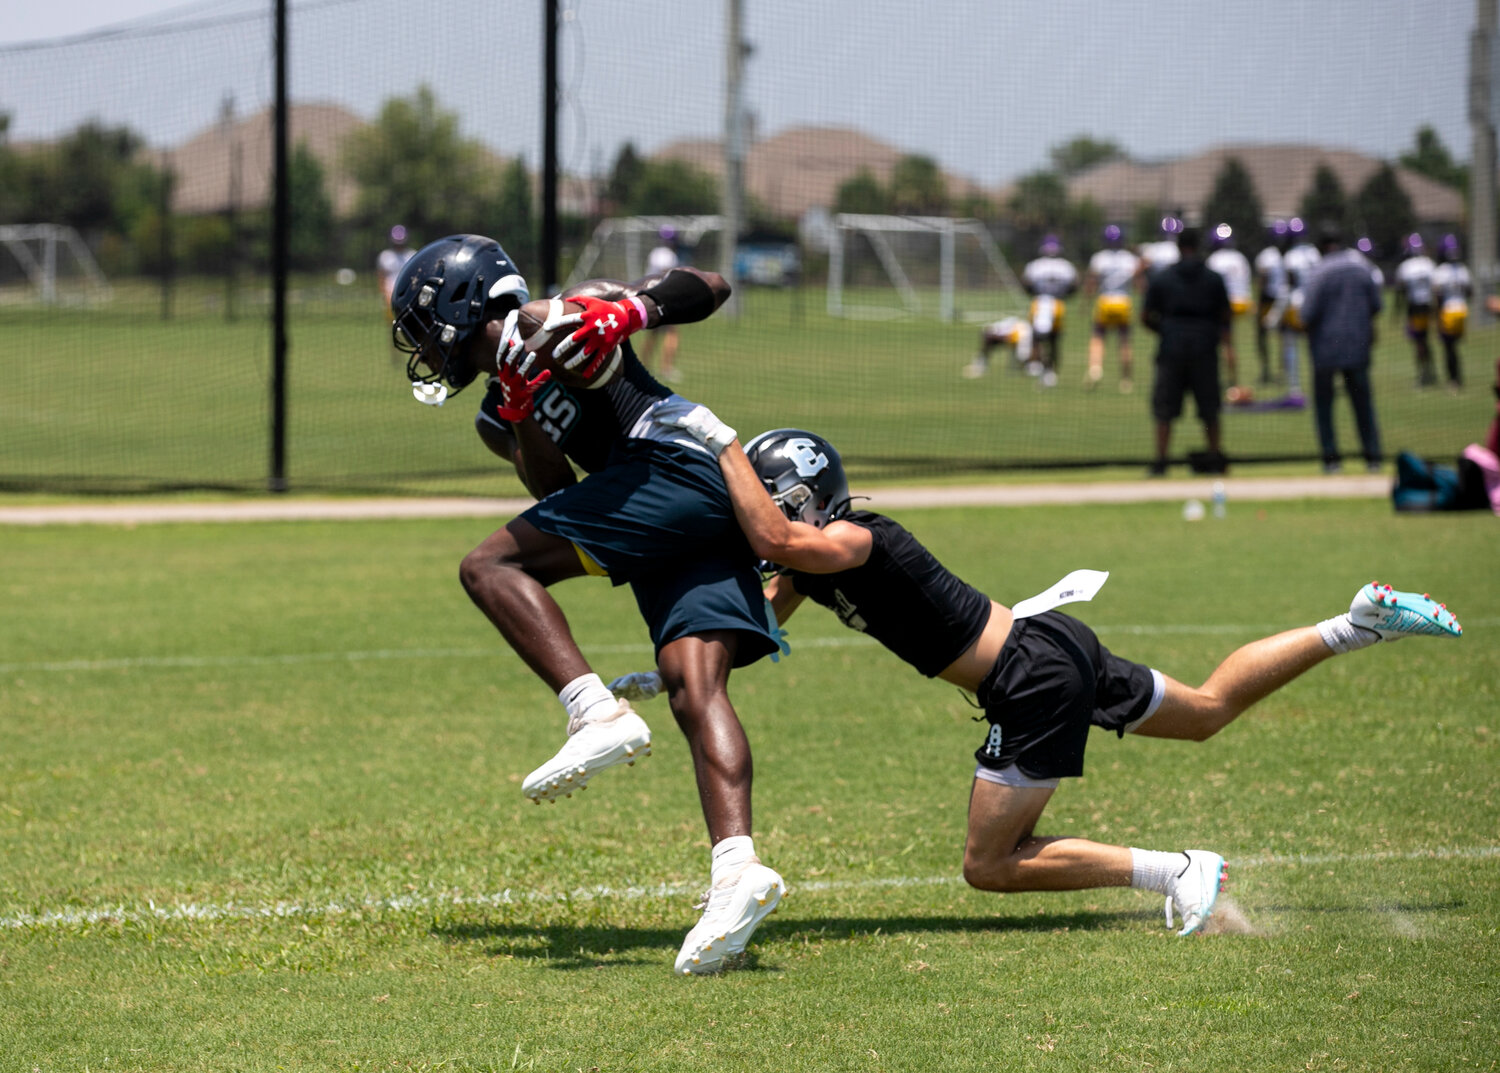 Gulf Shores senior Braden Jackson fights for extra yards and tumbles into the end zone for a touchdown during the Dolphins’ contest against the Elberta Warriors in the first round of bracket play Thursday, June 29, at the Foley 7-on-7 Showdown.